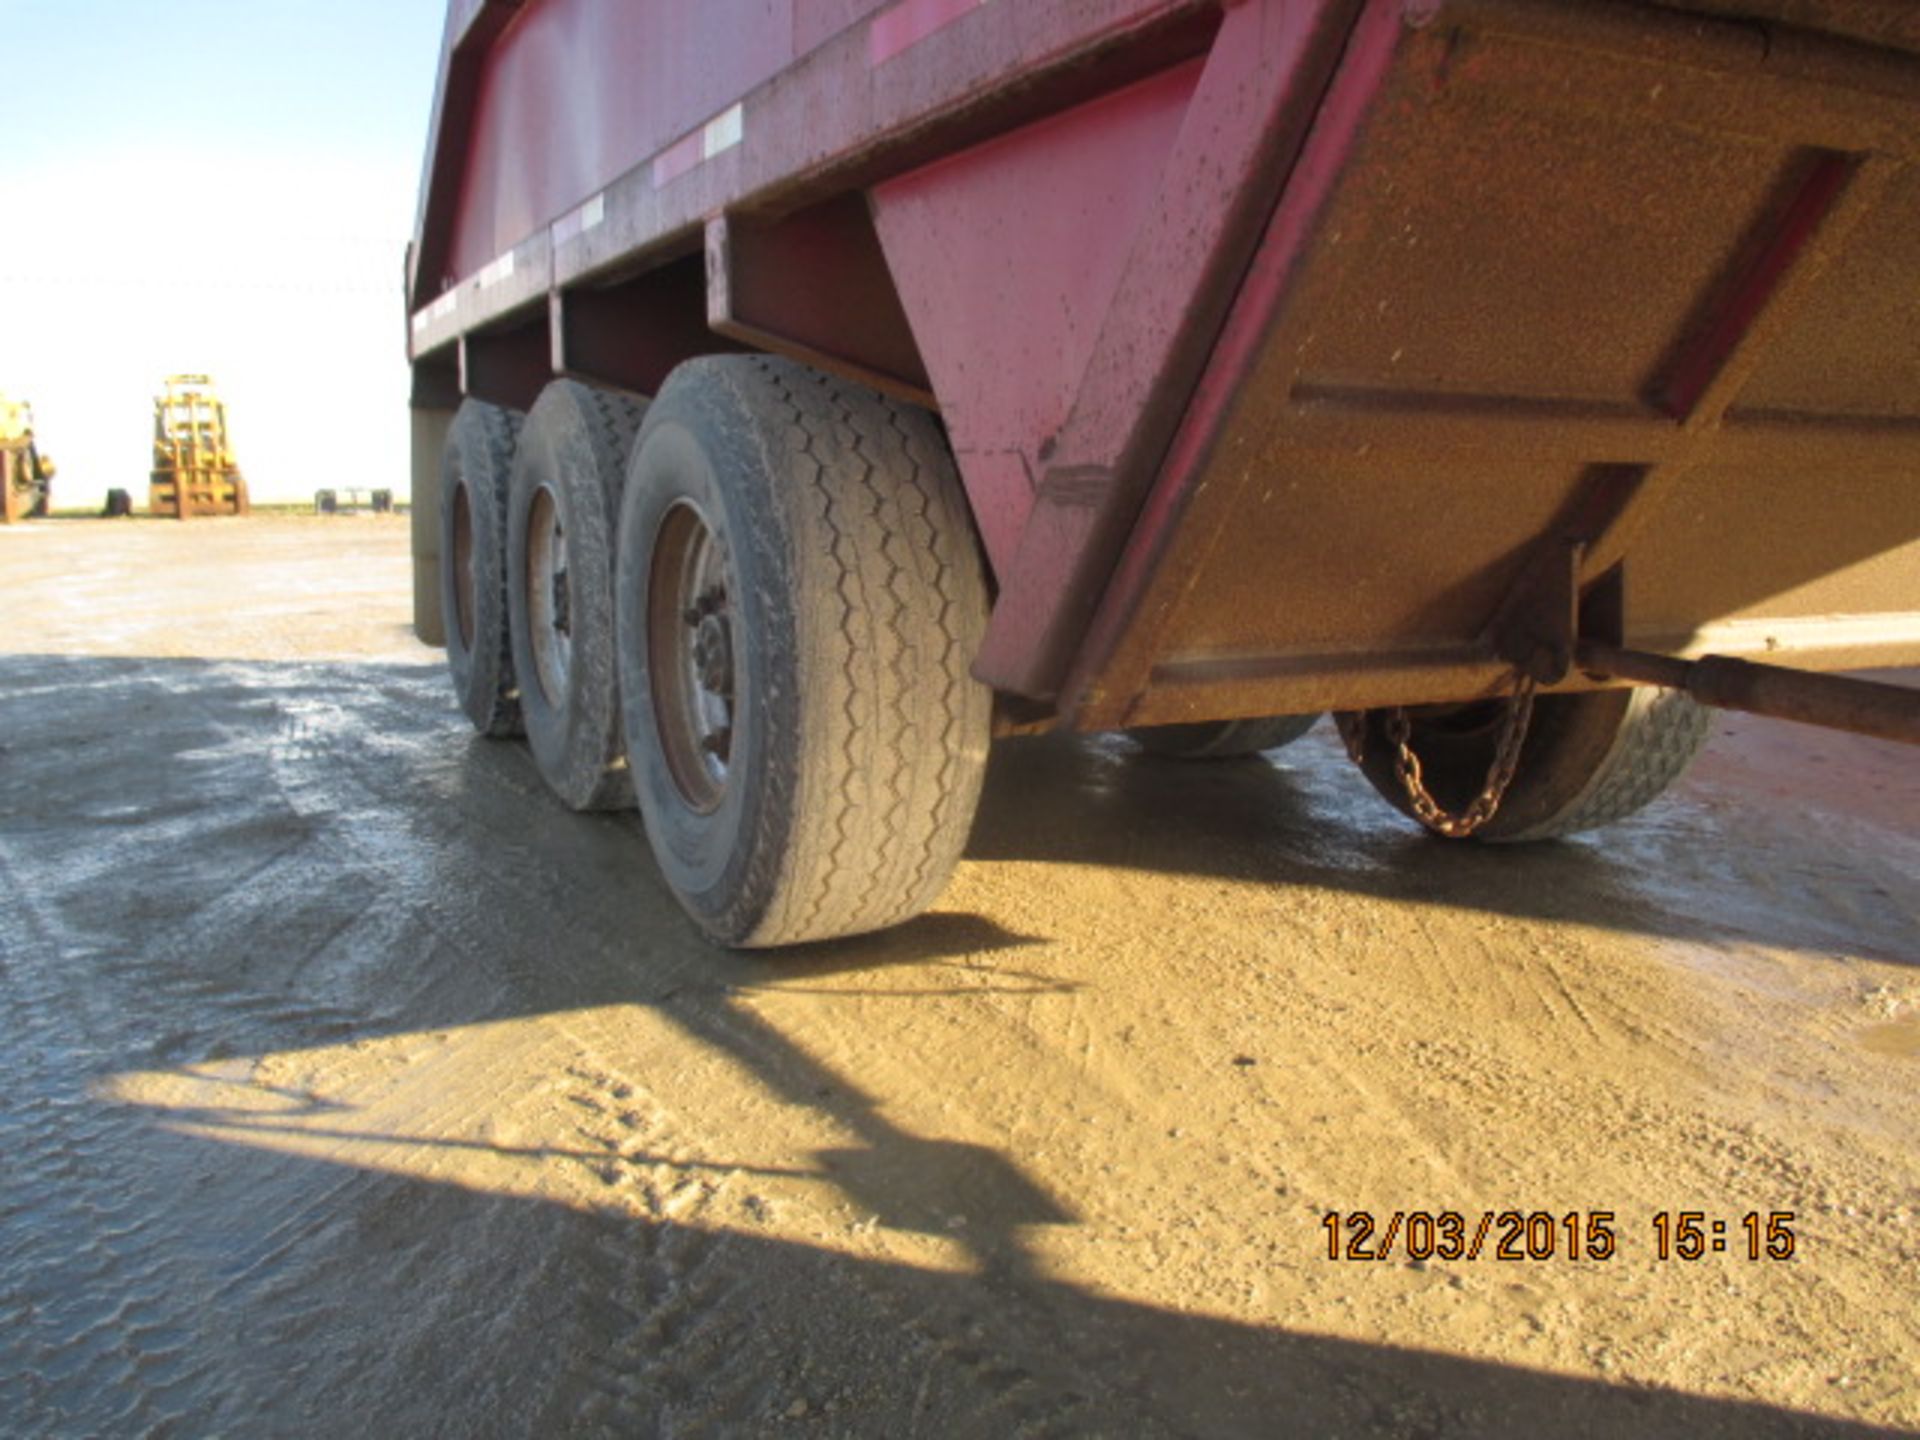 TITLE-Homemade tri-axle belly dump, VIN:HMDS834309R003175, unit BD-08 - Image 3 of 5